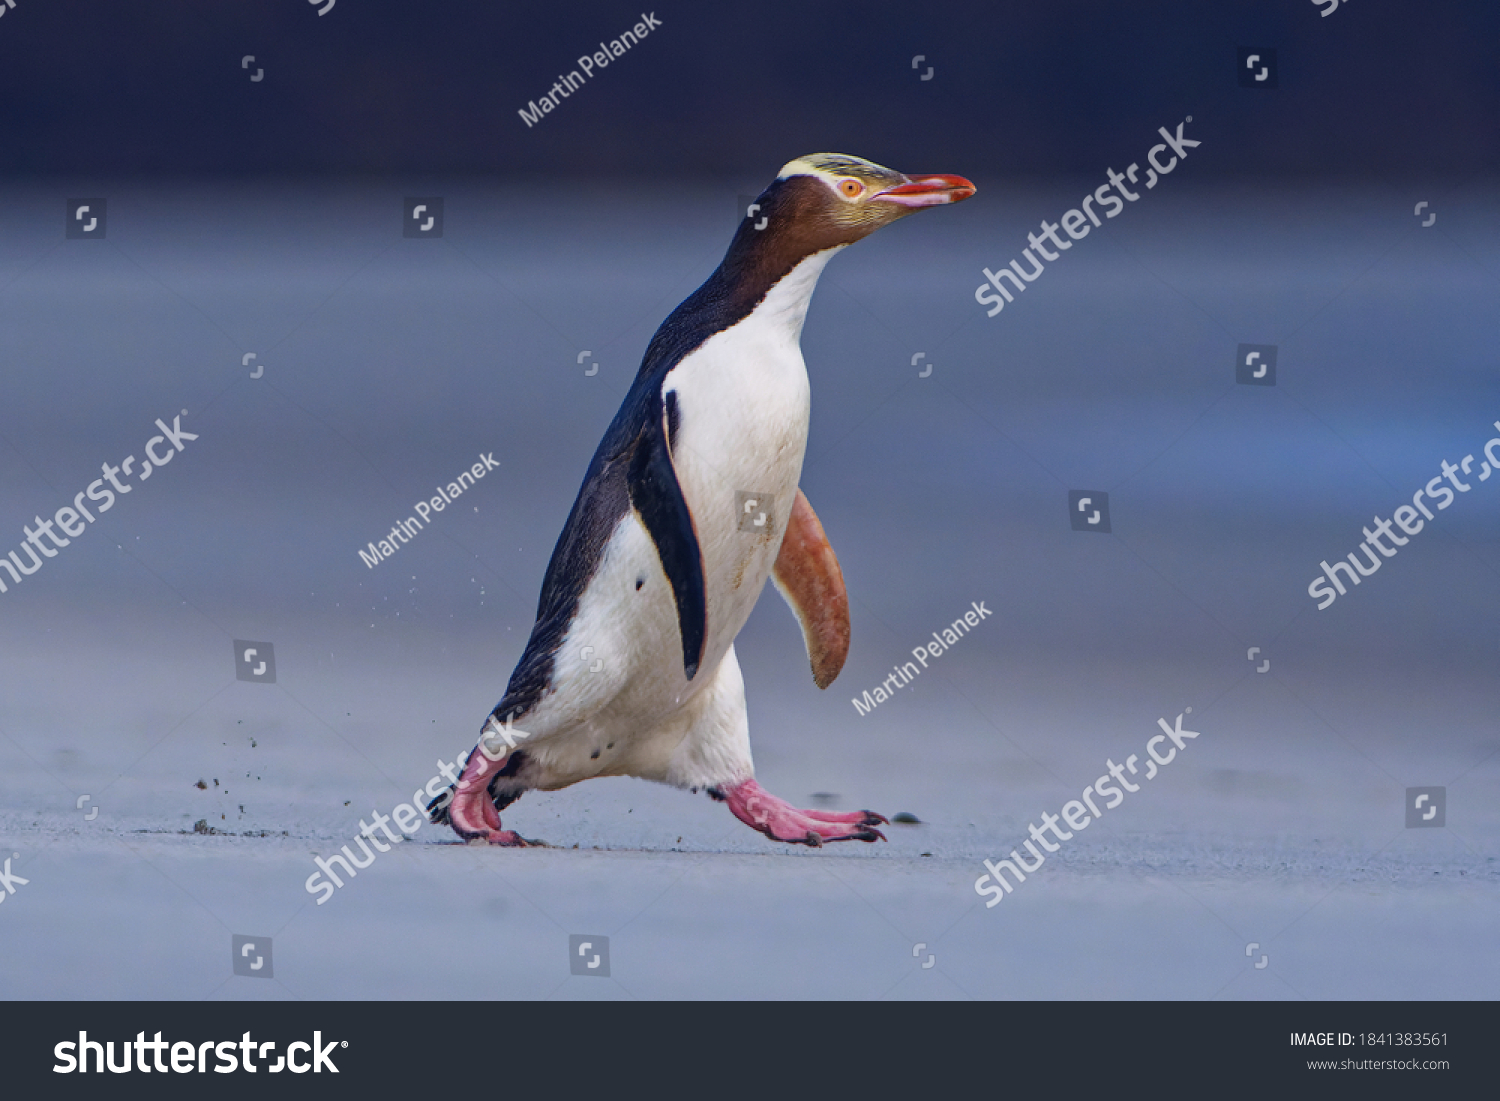 Yellow-eyed penguin - hoiho - Megadyptes antipodes, breeds along the eastern and south-eastern coastlines of the South Island of New Zealand, Stewart Island, Auckland Islands, Campbell Islands. #1841383561